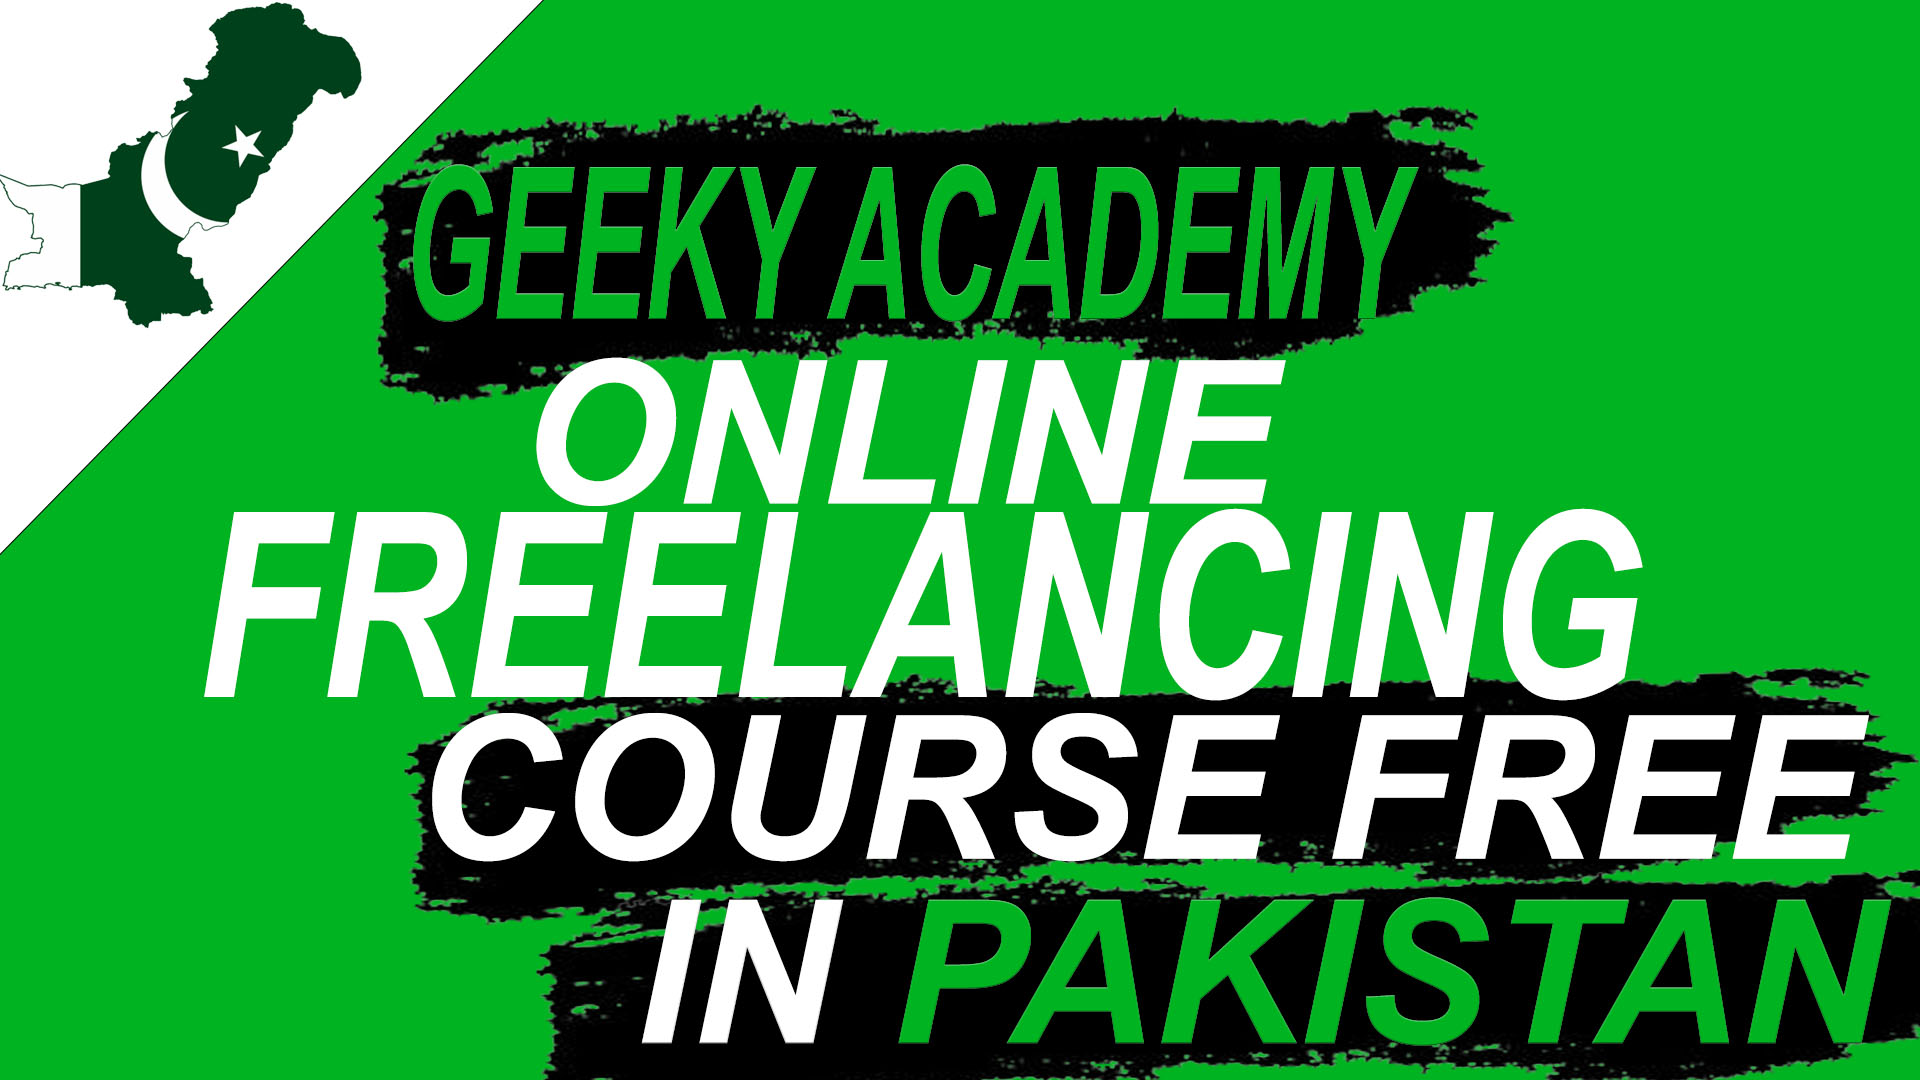 Geeky Academy Online Freelancing Course Free in Pakistan